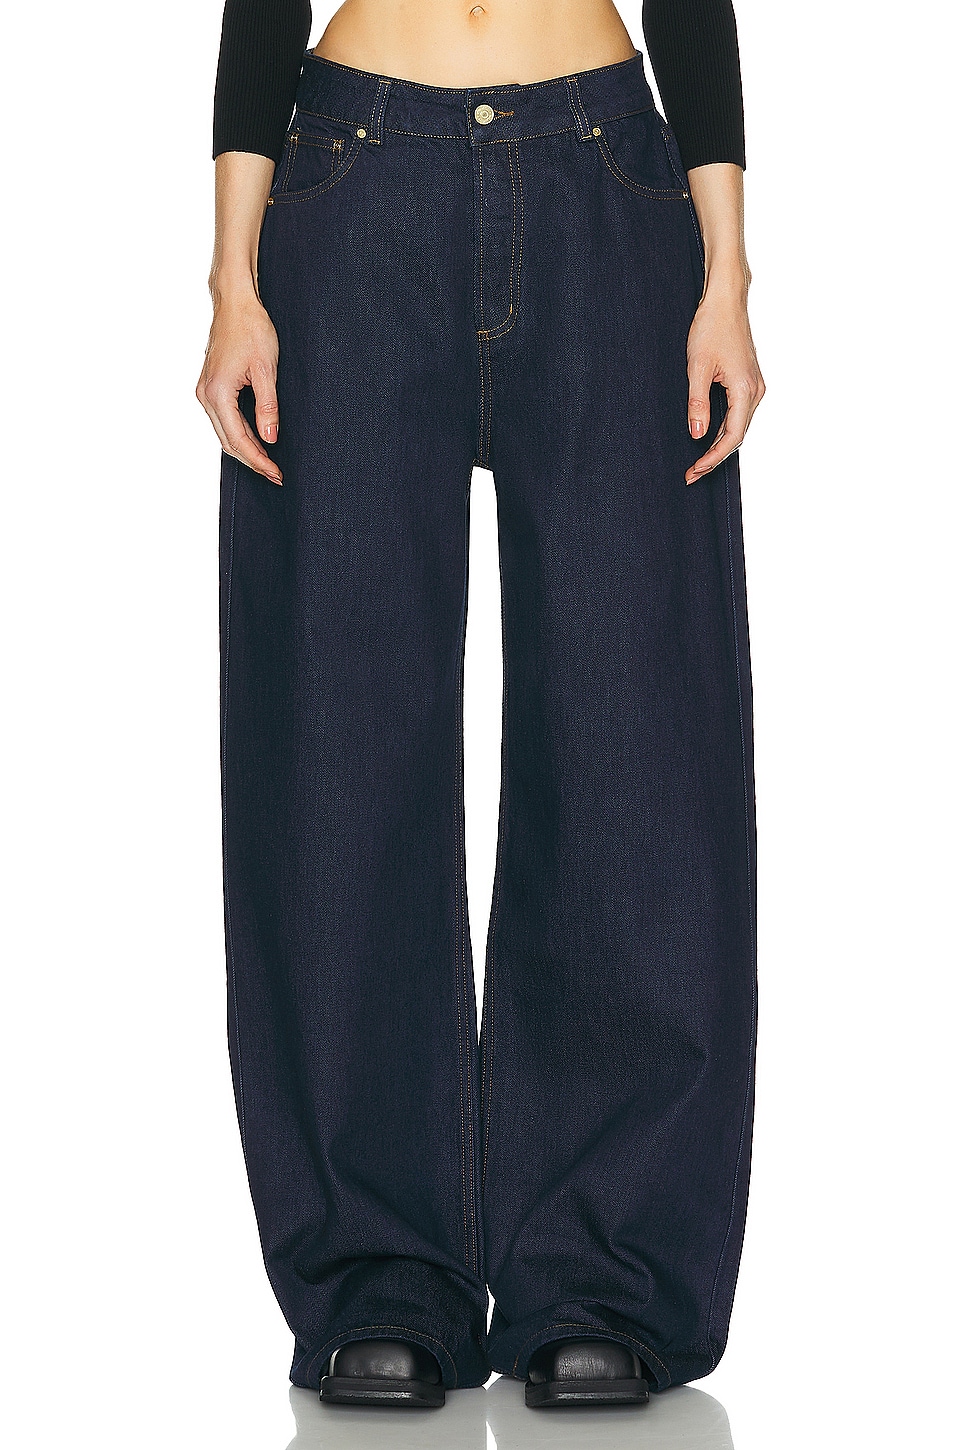 Image 1 of Heavy Manners Low Rise Baggy Denim in Islands